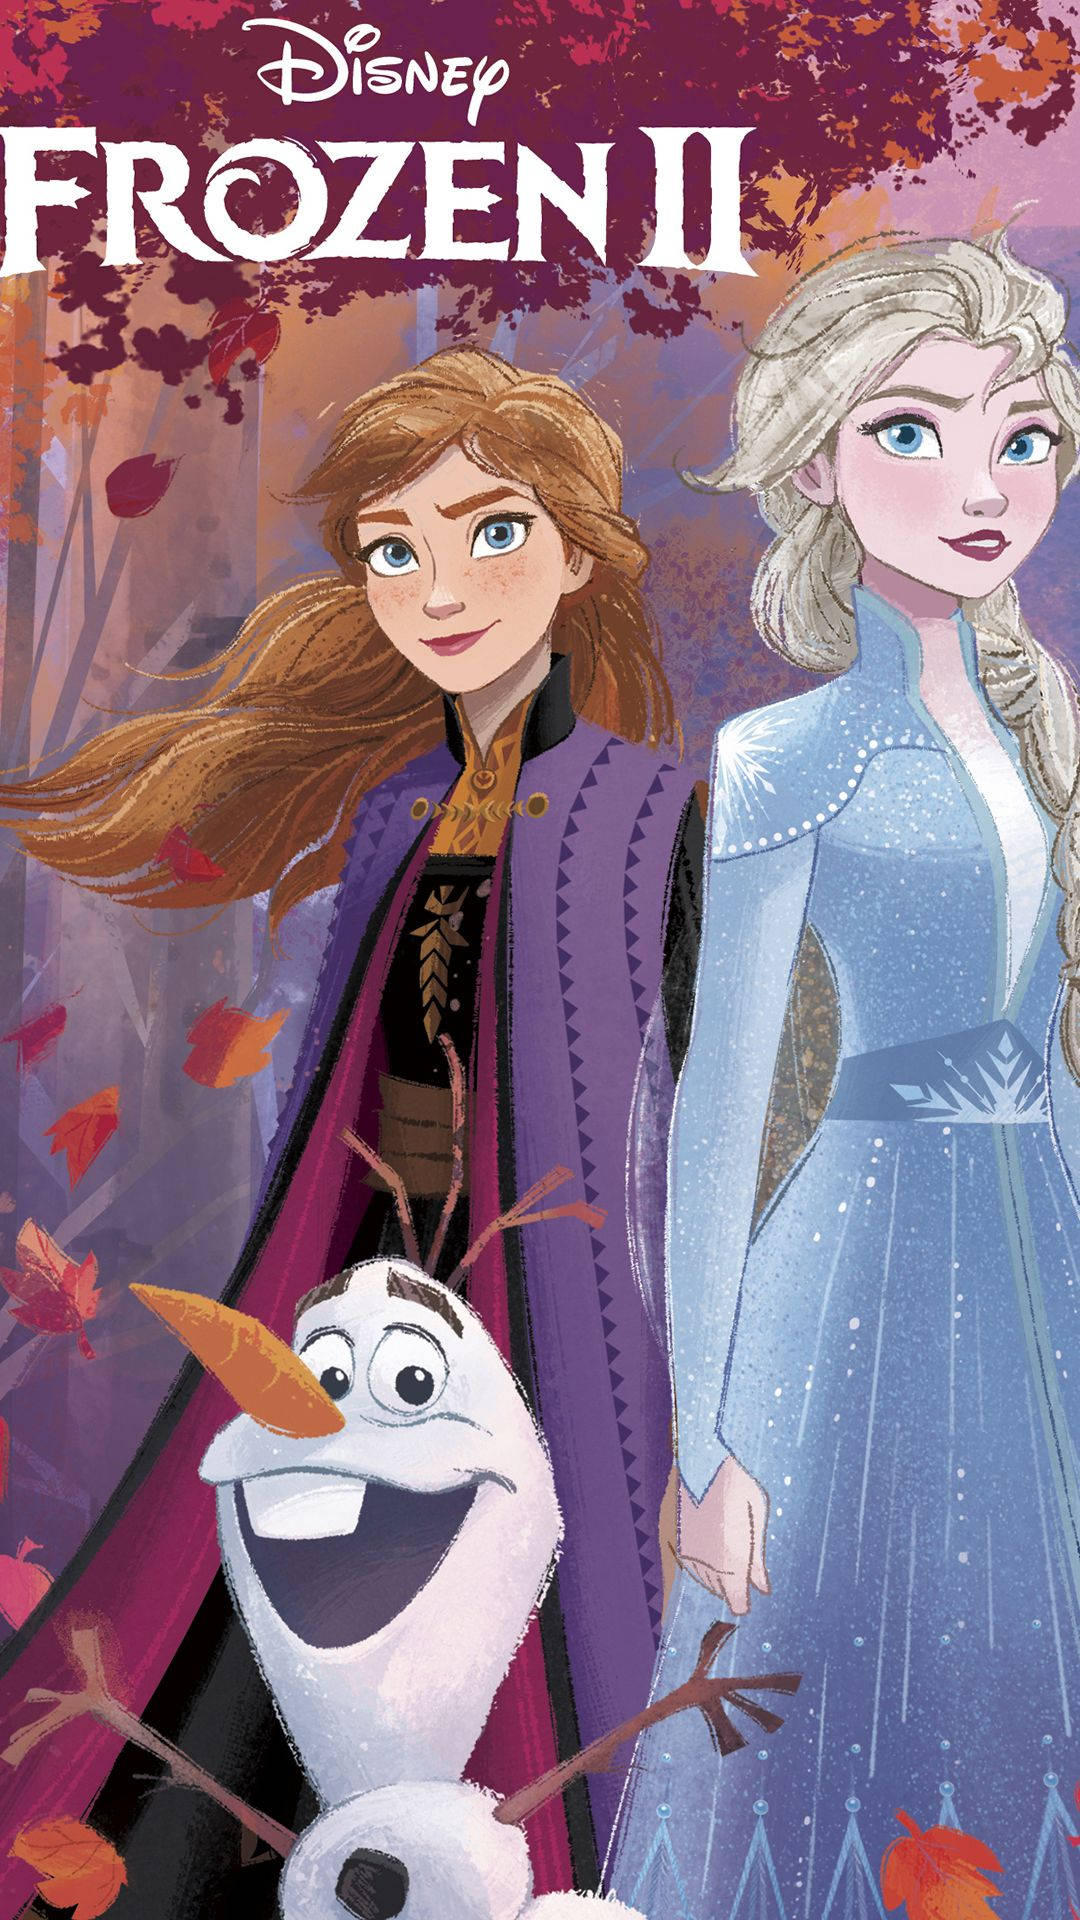 Enjoy autumn with Anna, Elsa, and Olaf in Frozen 2 Wallpaper